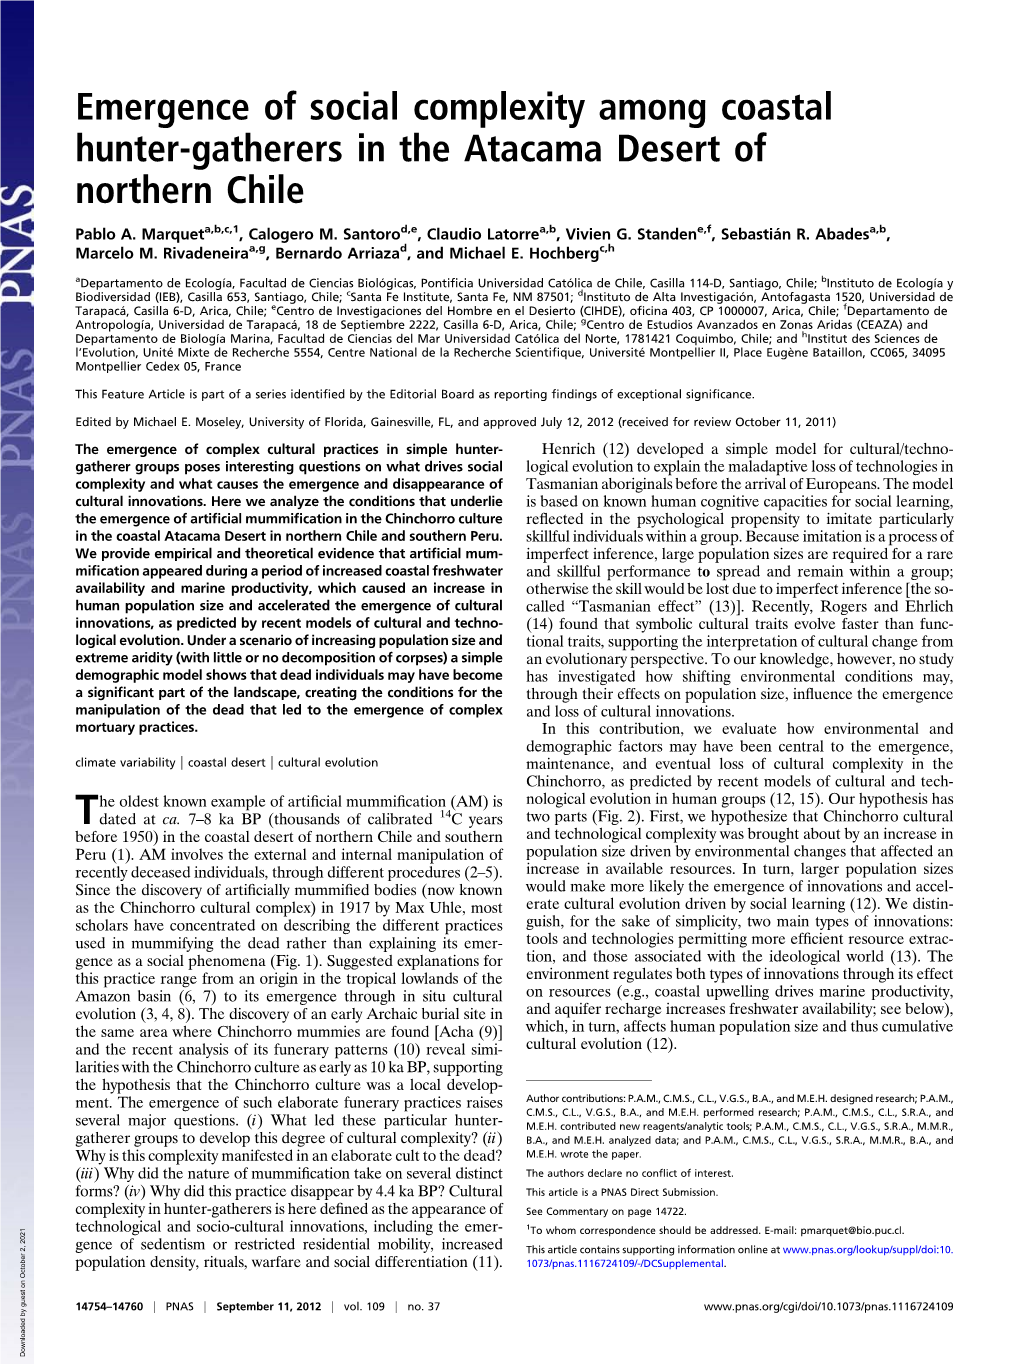 Emergence of Social Complexity Among Coastal Hunter-Gatherers in the Atacama Desert of Northern Chile